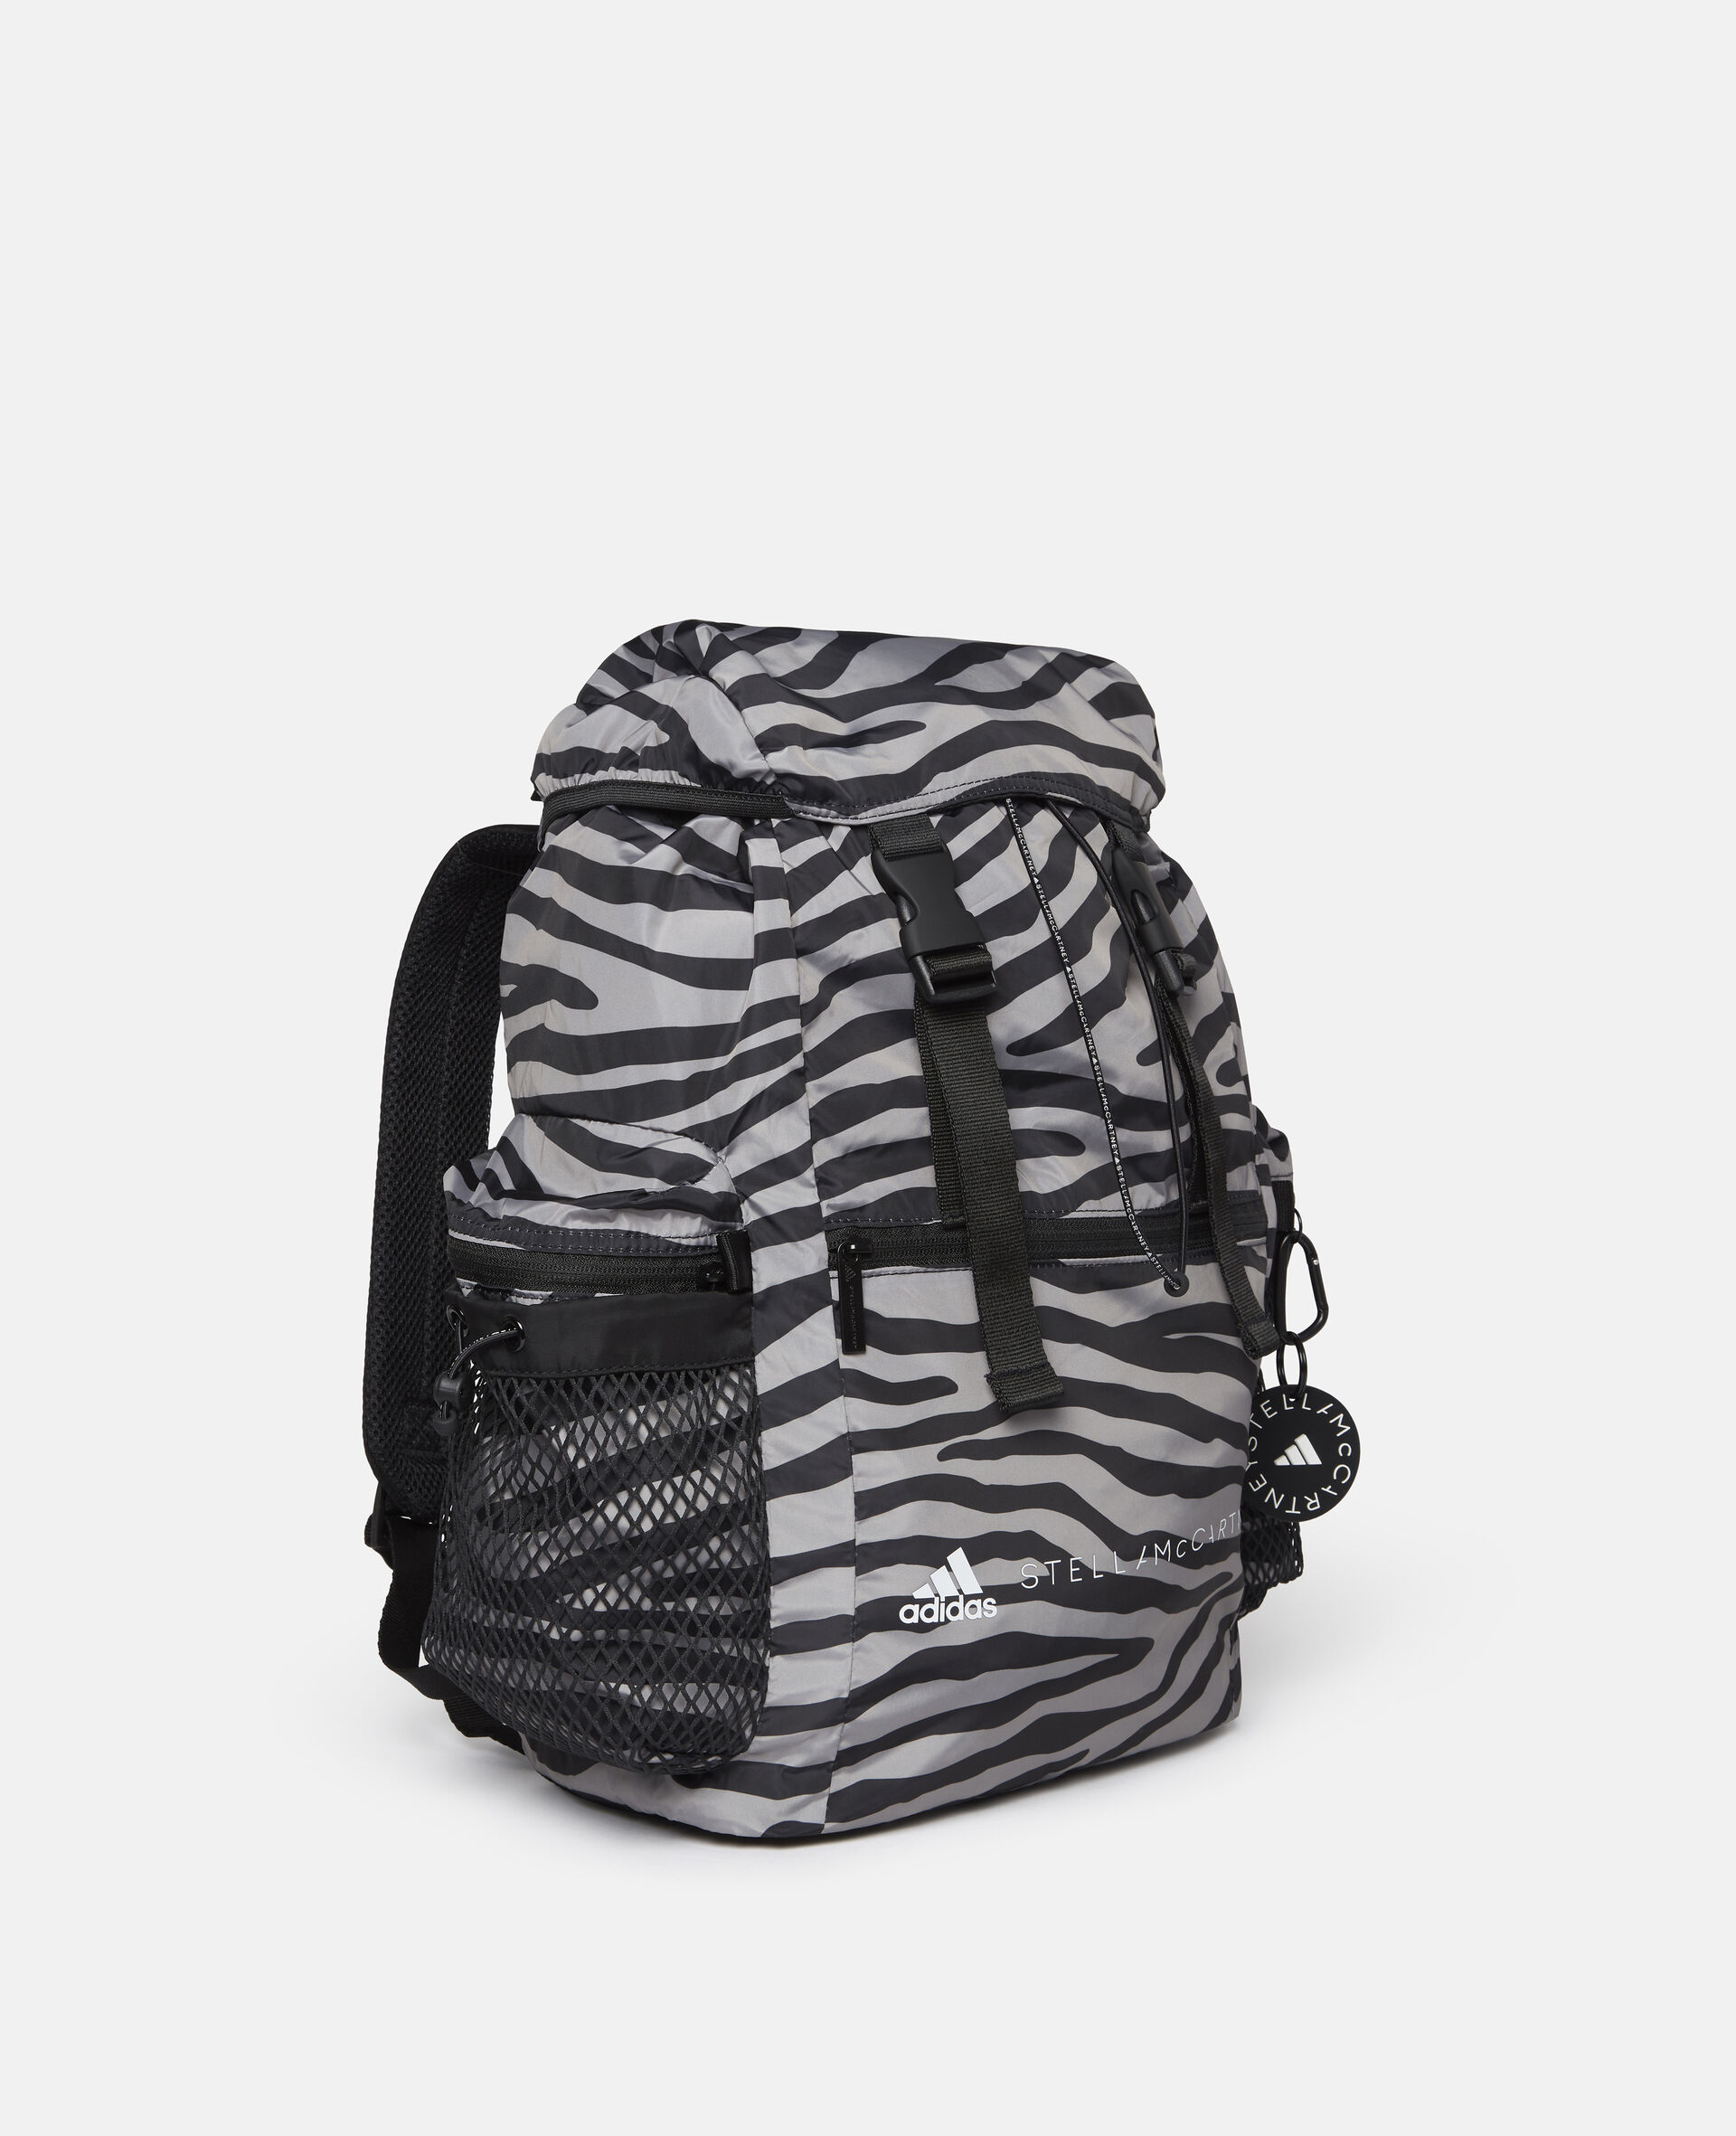 Printed Backpack-Multicolour-large image number 1